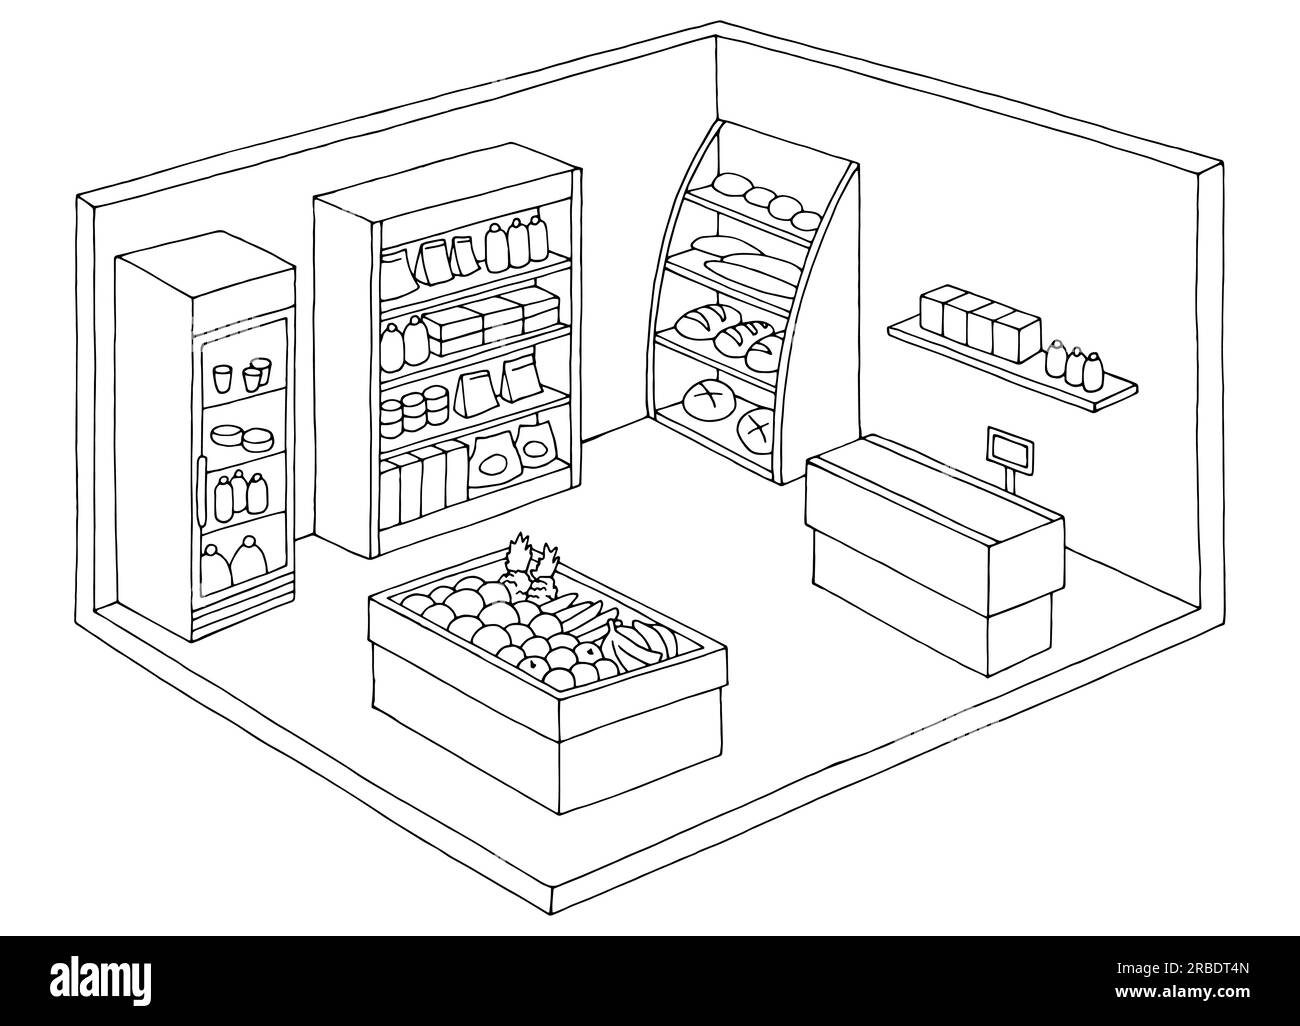 Grocery store shop interior black white graphic isolated sketch illustration vector Stock Vector